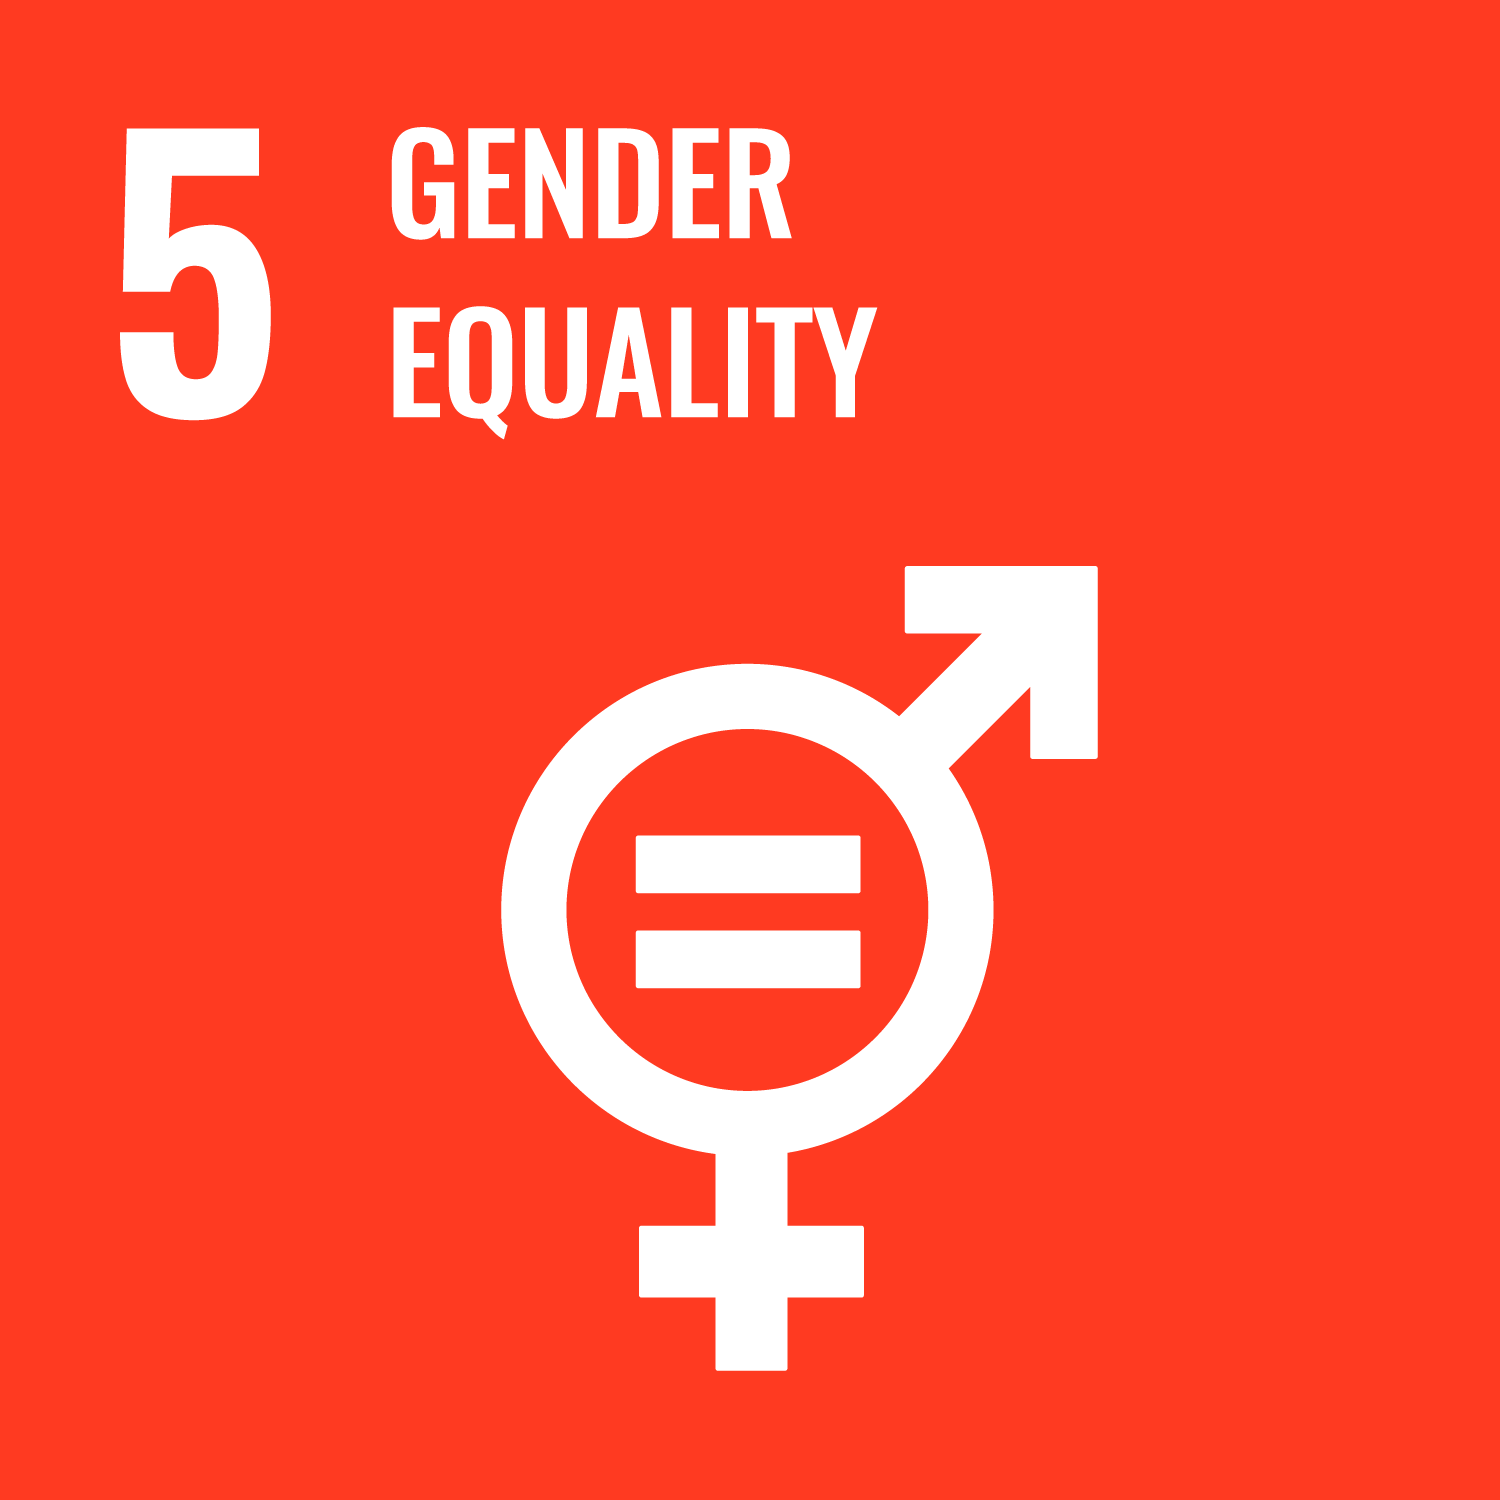 United Nations Sustainable Development Goal Number 5 Gender Equality